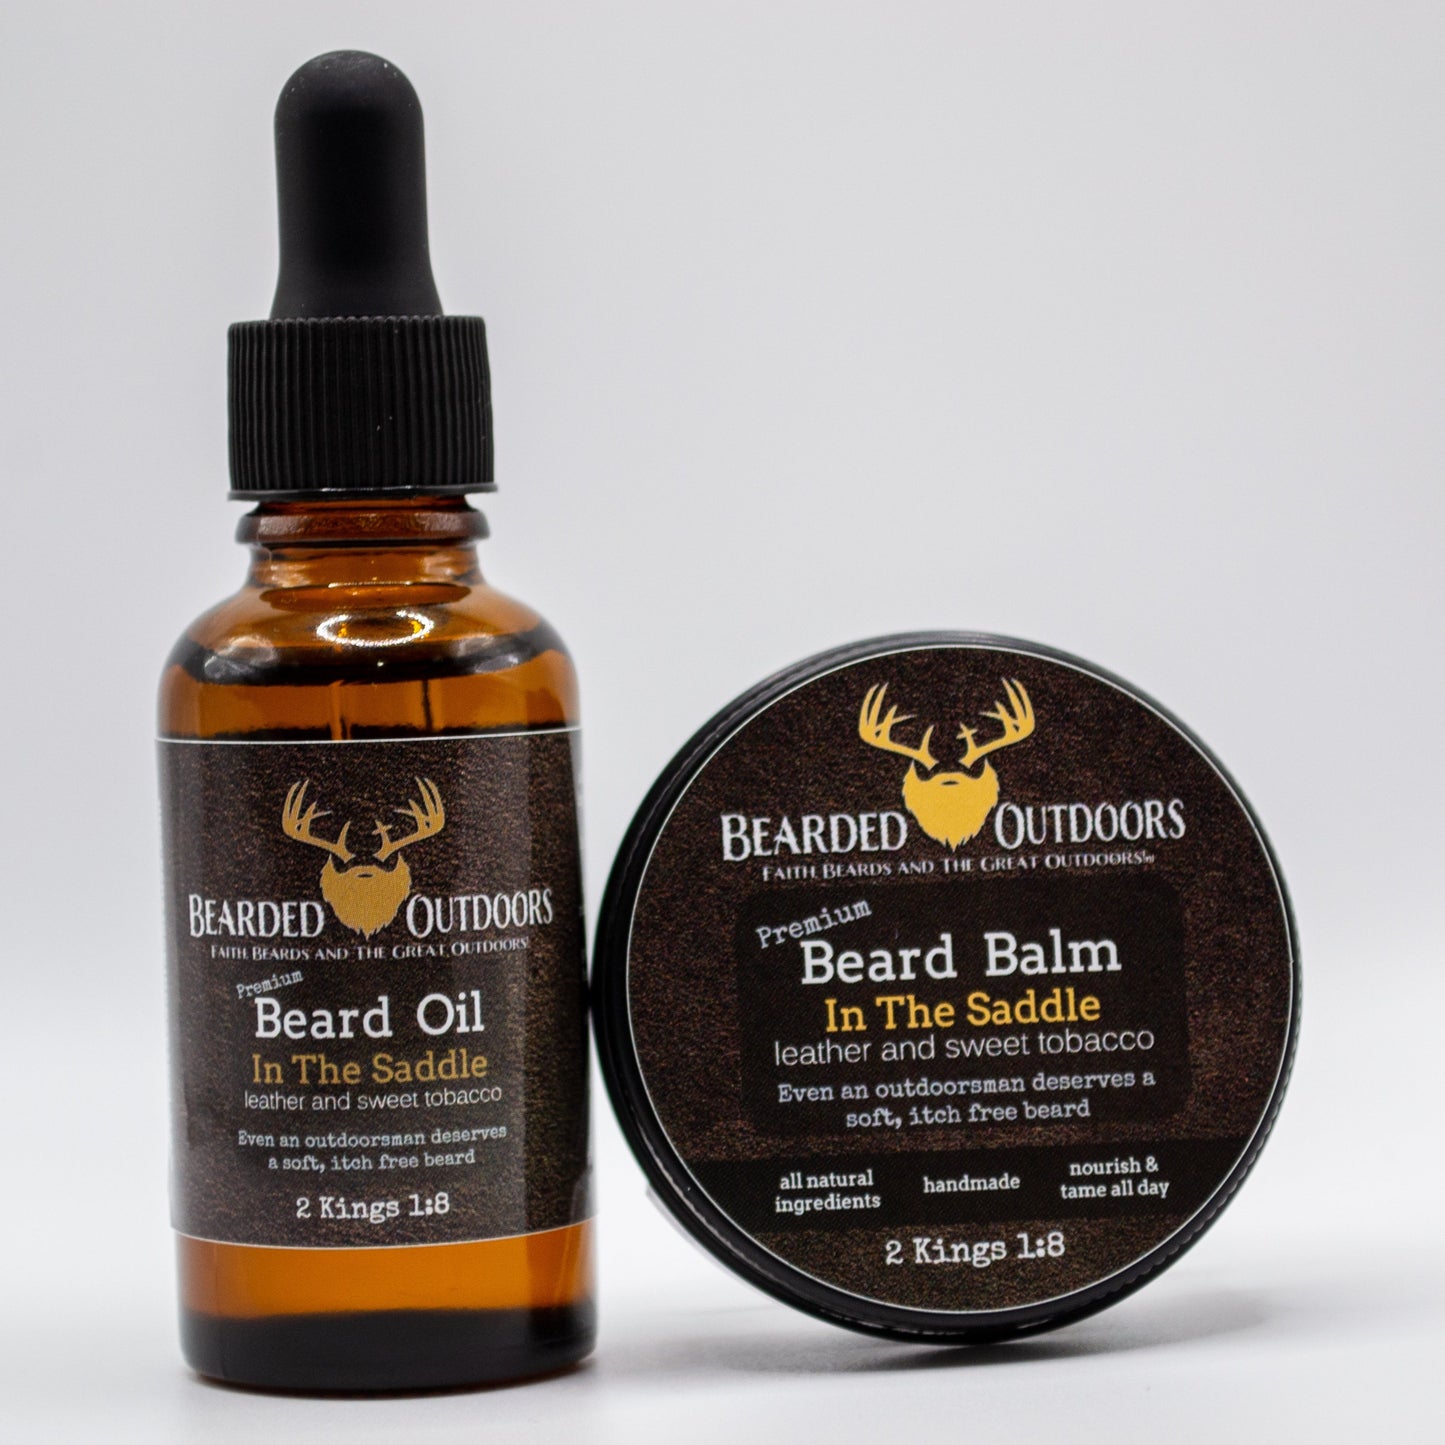 Bearded Outdoors In The Saddle (Leather and Sweet Tobacco) Premium Beard Oil and Beard Balm Combo